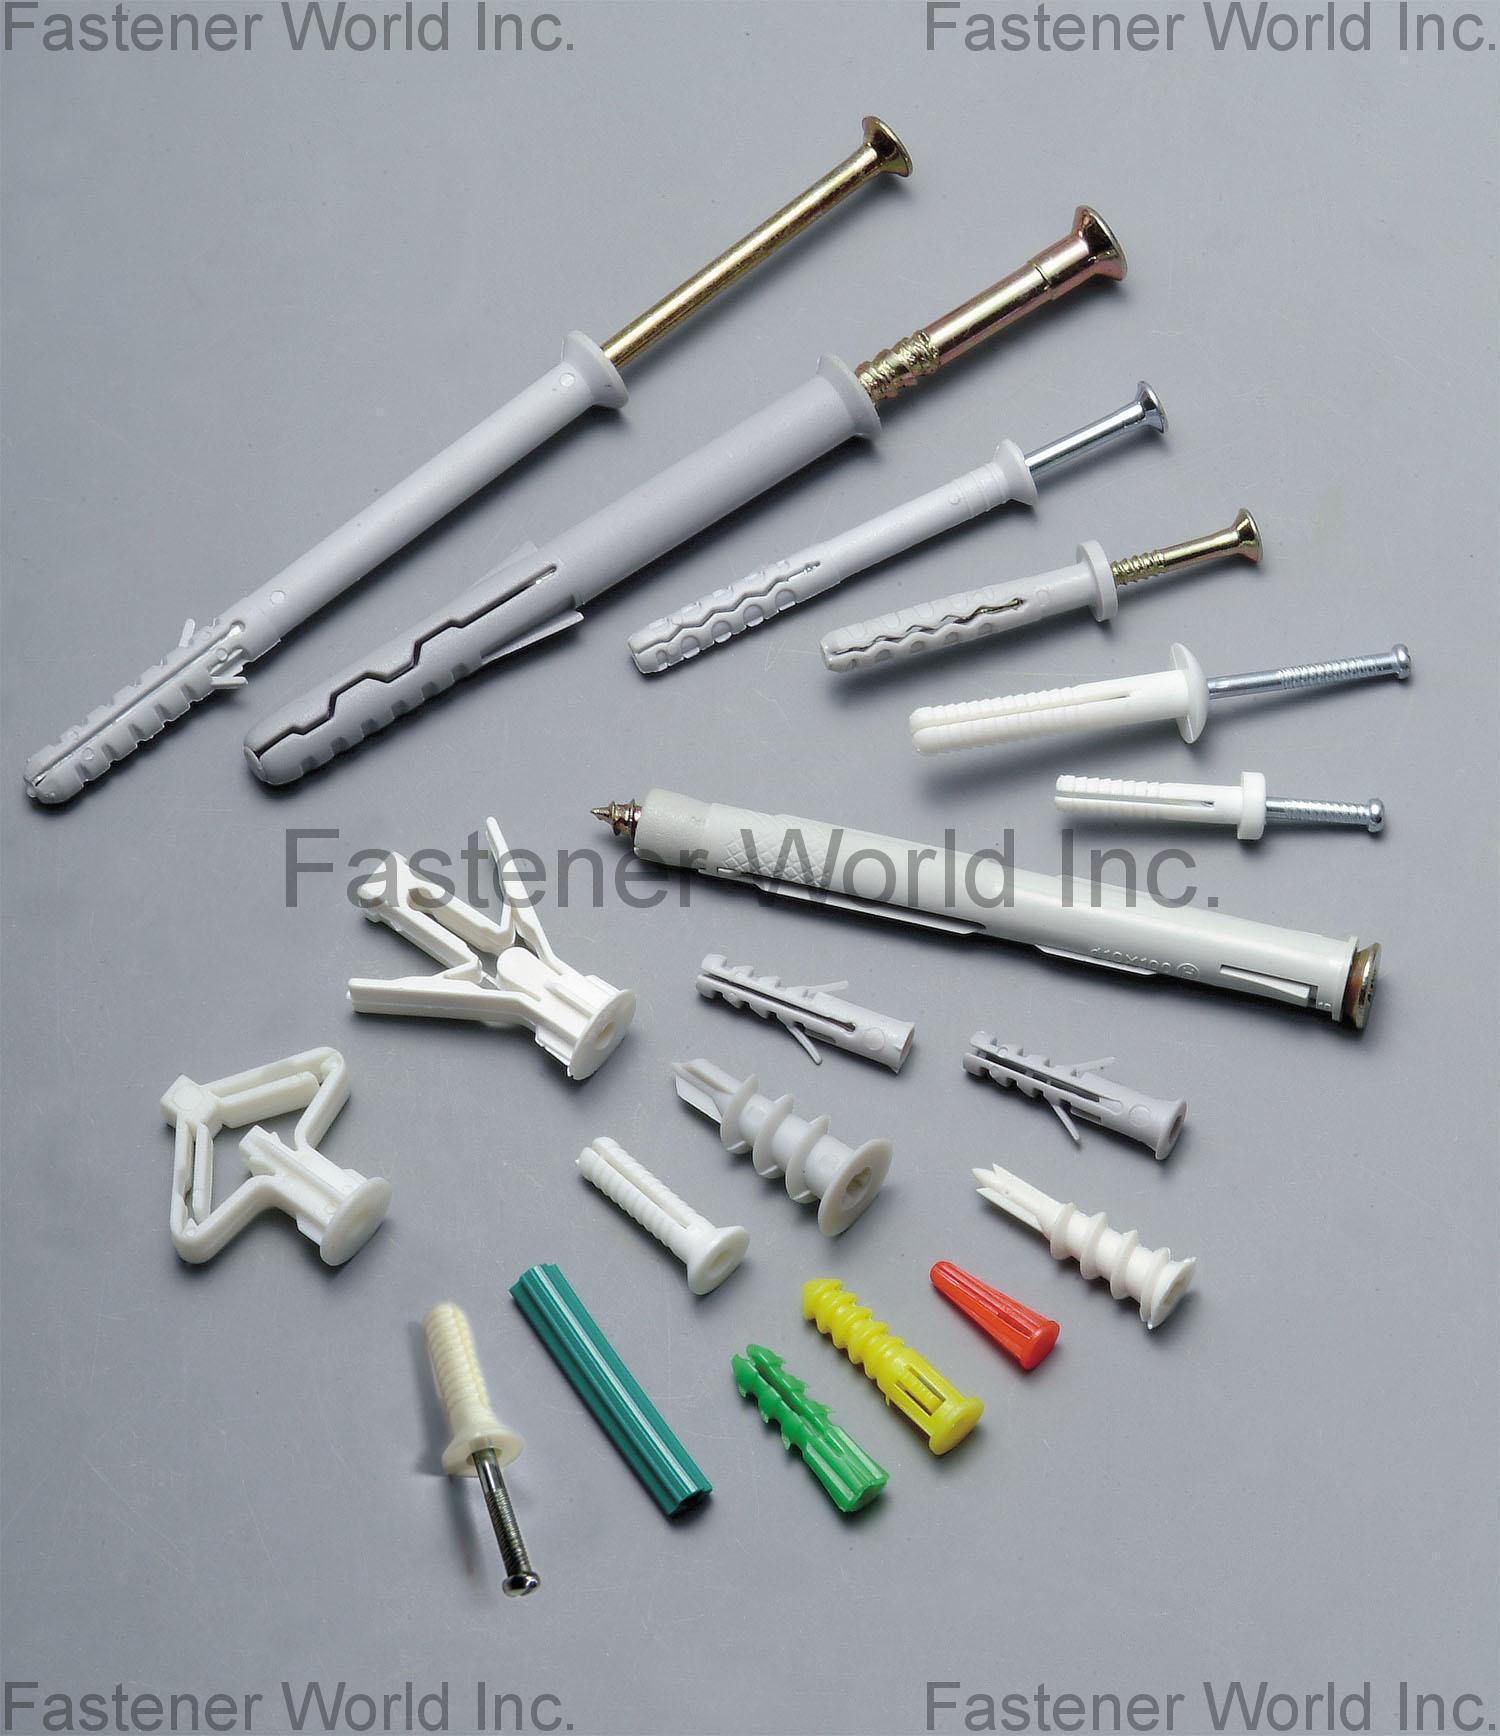 MAXTOOL INDUSTRIAL CO., LTD. , Conical Plastic Anchors